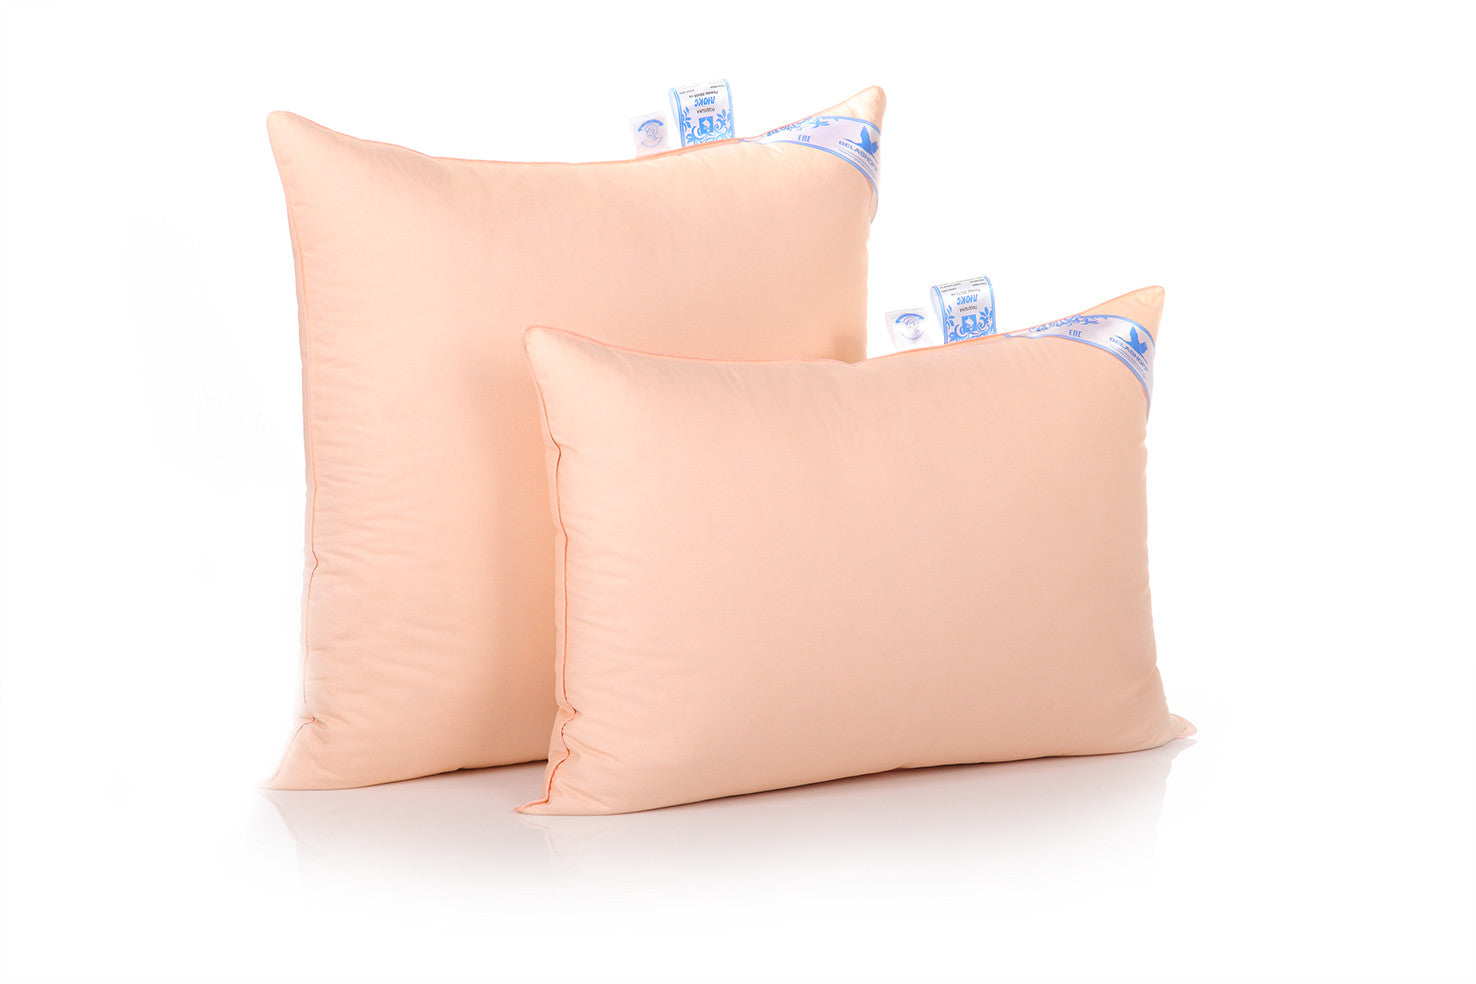 Solid Baby Peach Pink Throw Pillow Cover - Decorative Pillows